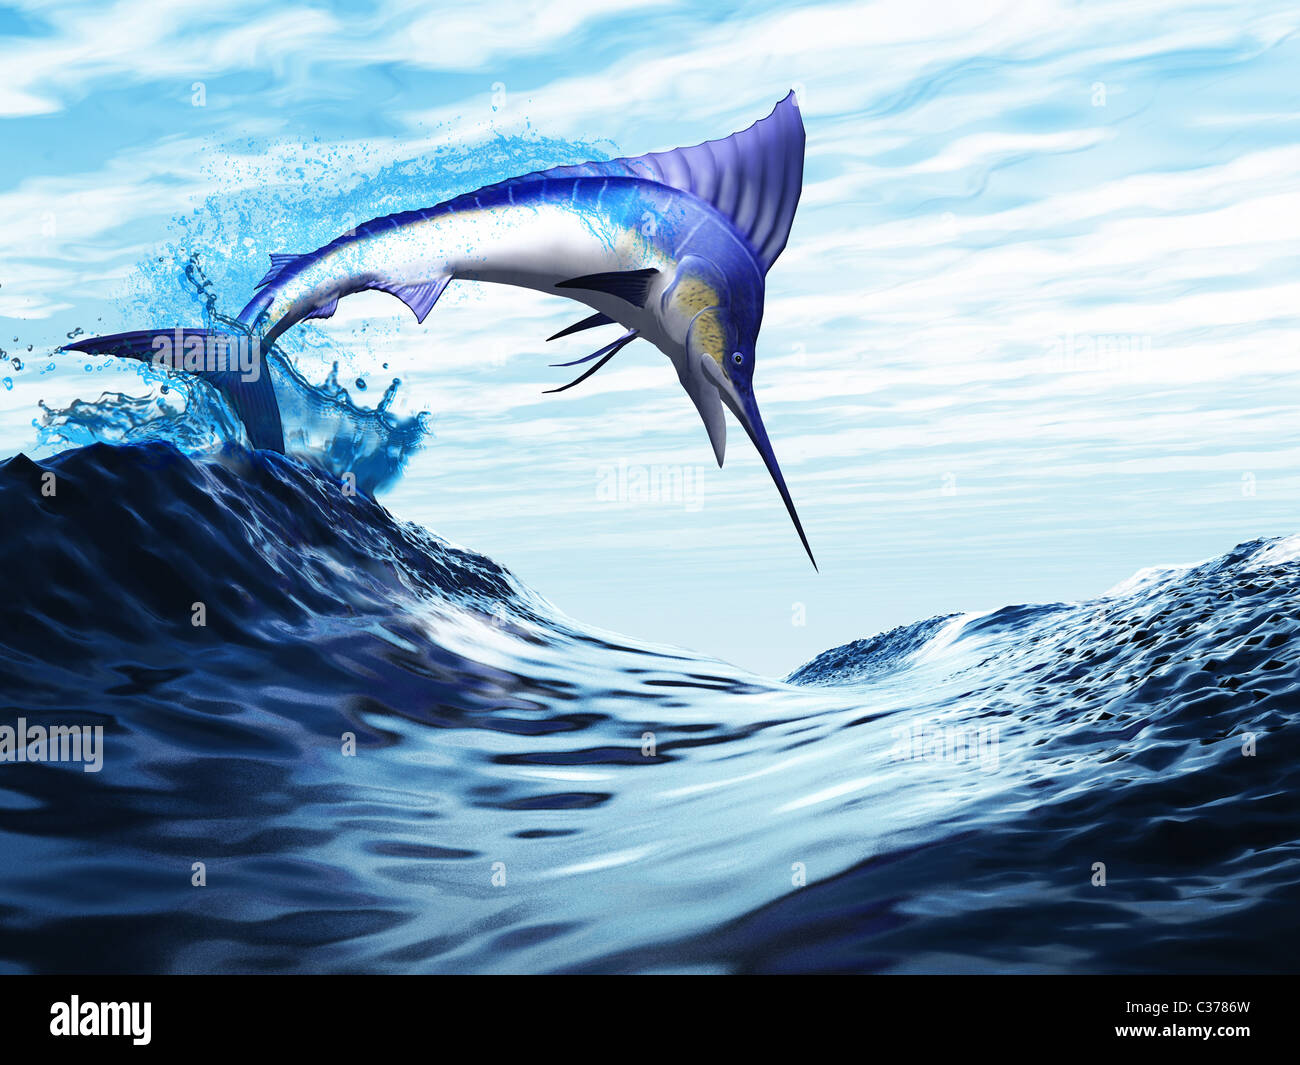 A beautiful blue marlin bursts through a wave in a spectacular jump. Stock Photo